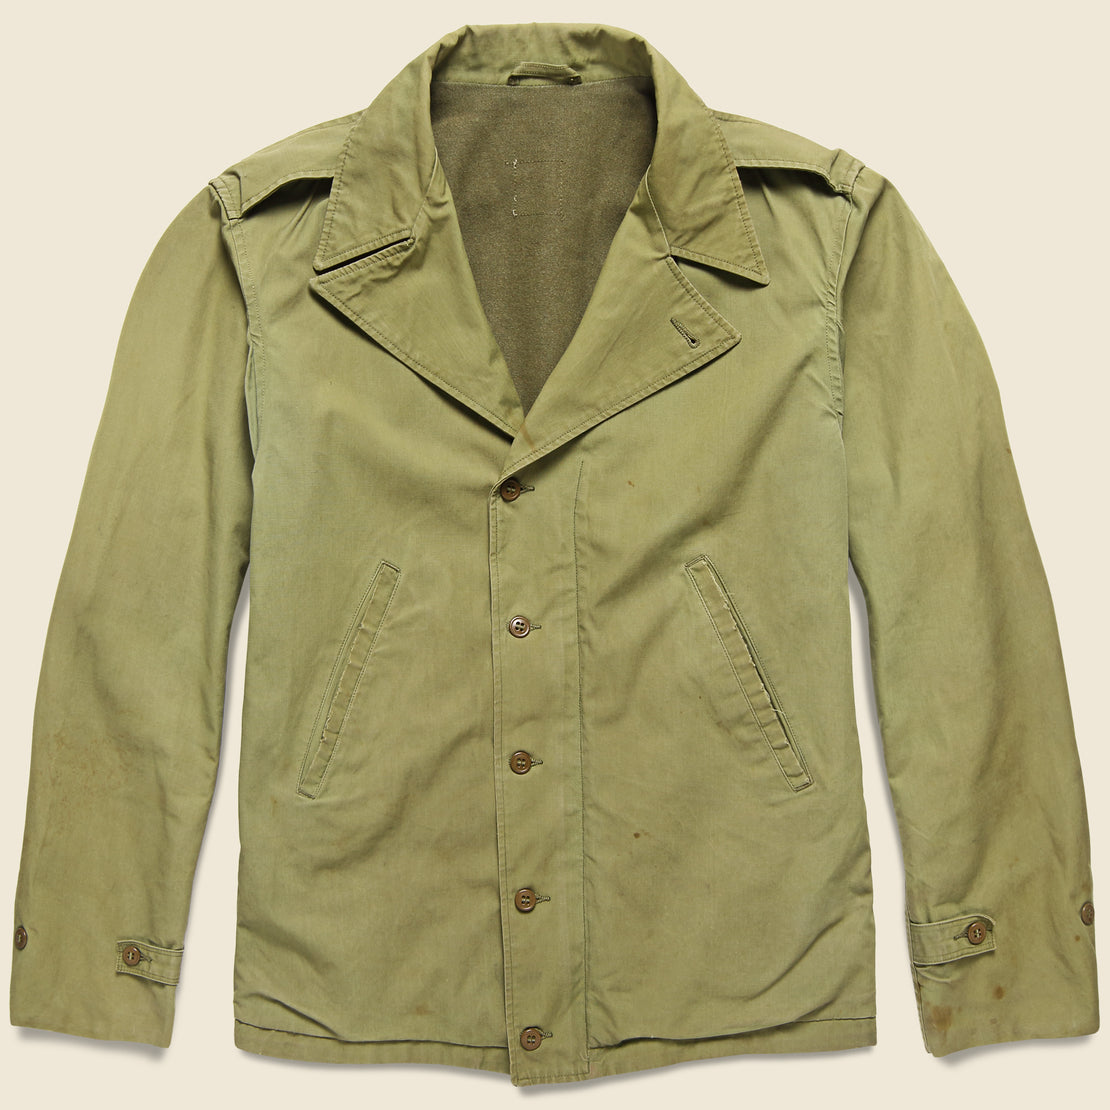 Vintage WWII Air Force Utility Jacket - Military Green